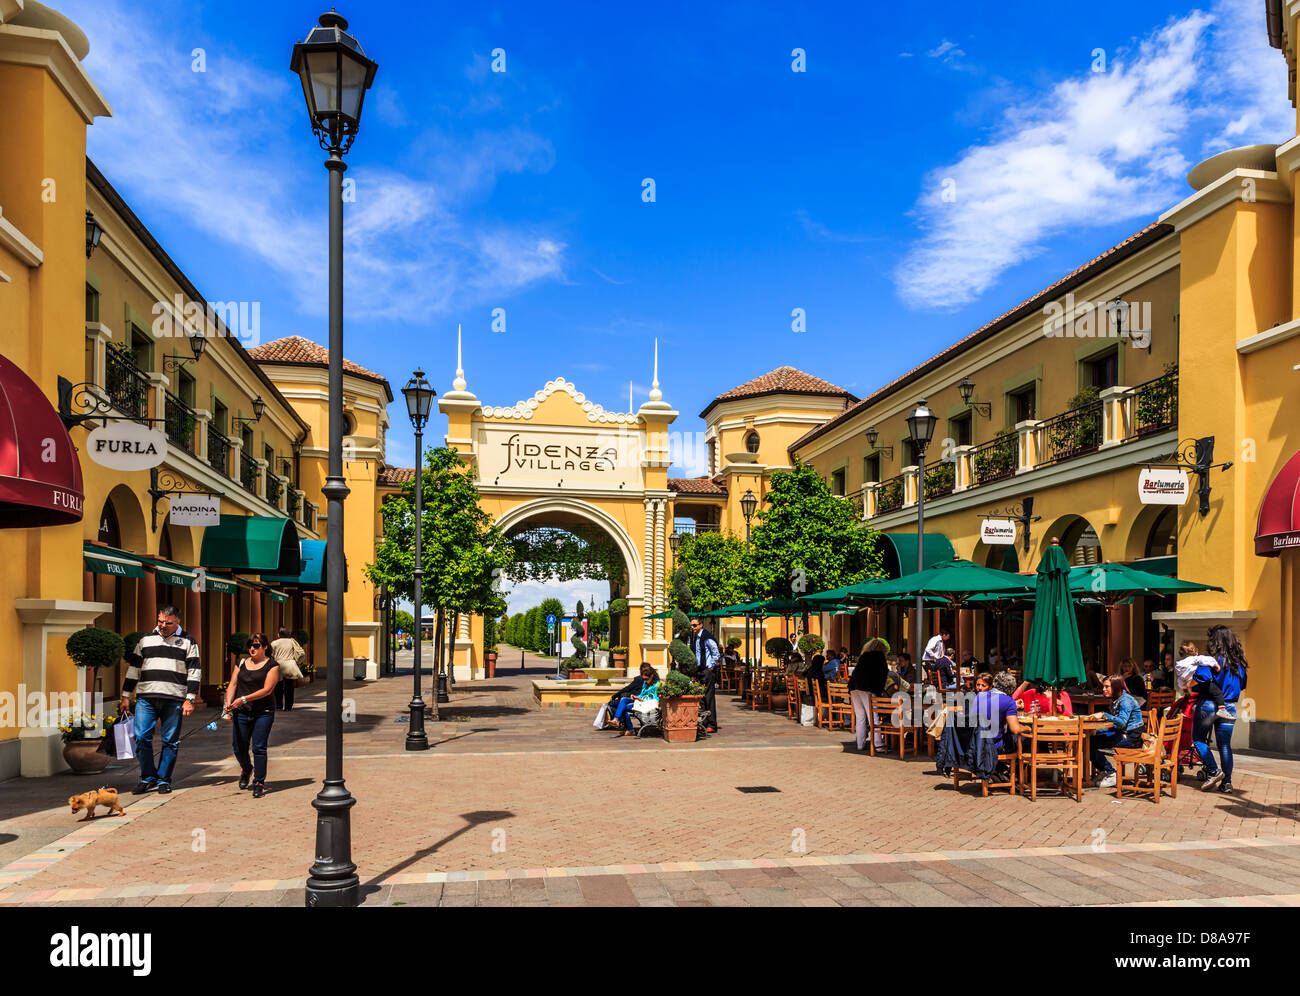 Factory Outlet Mall High Resolution Stock Photography and Images - Alamy